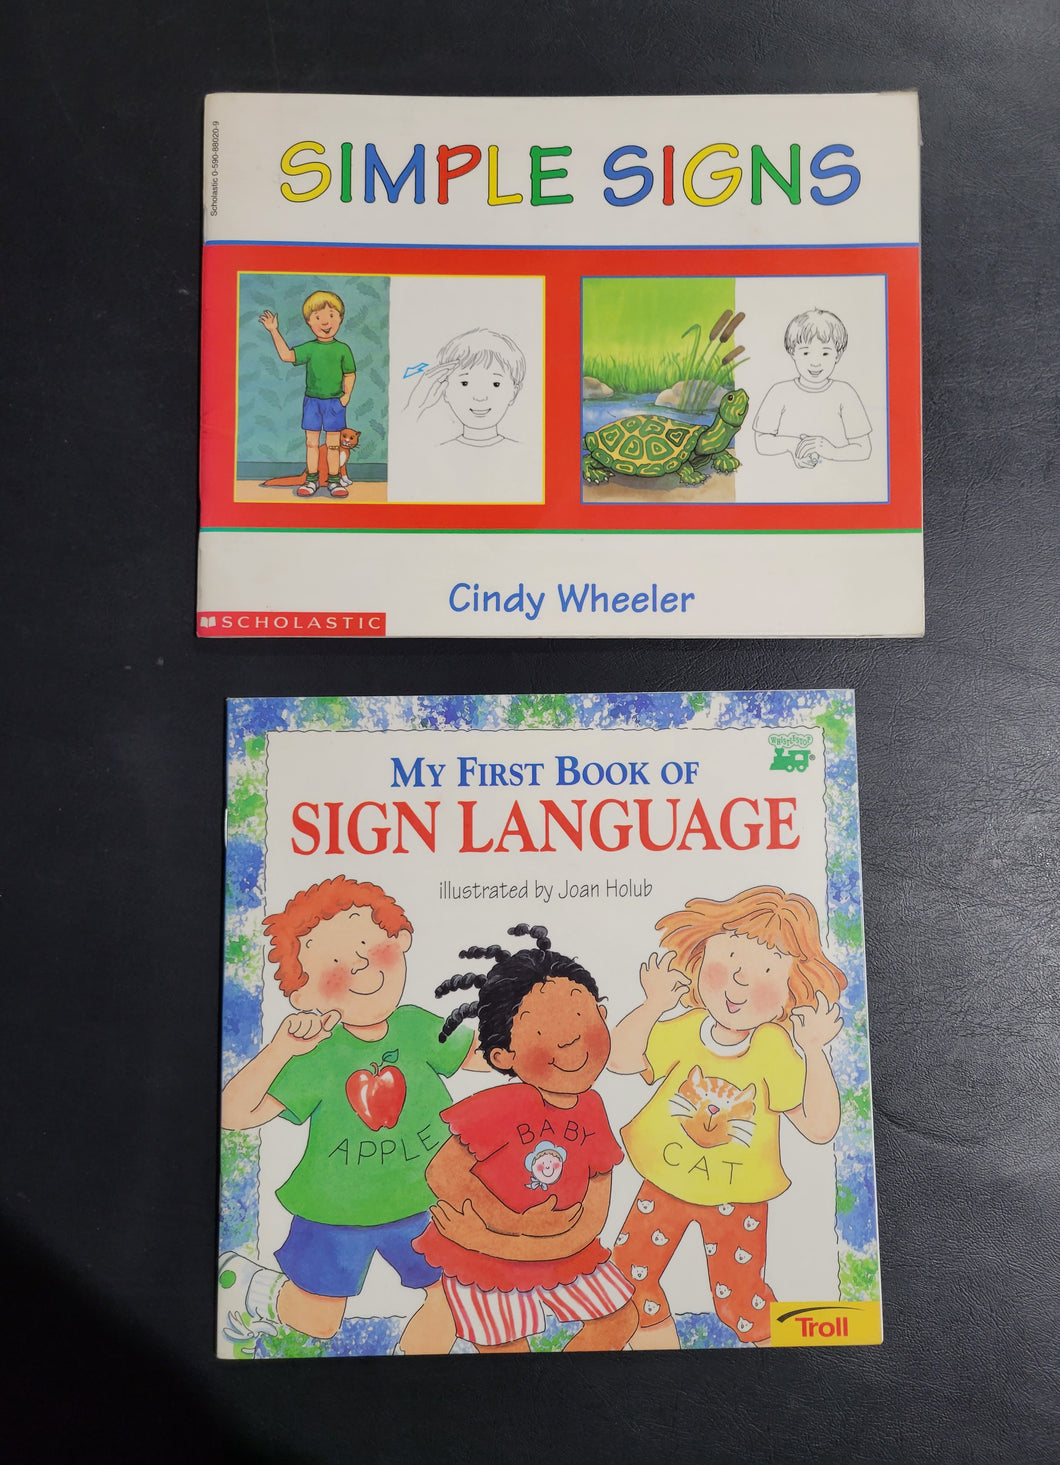 Introduction to Sign-Language